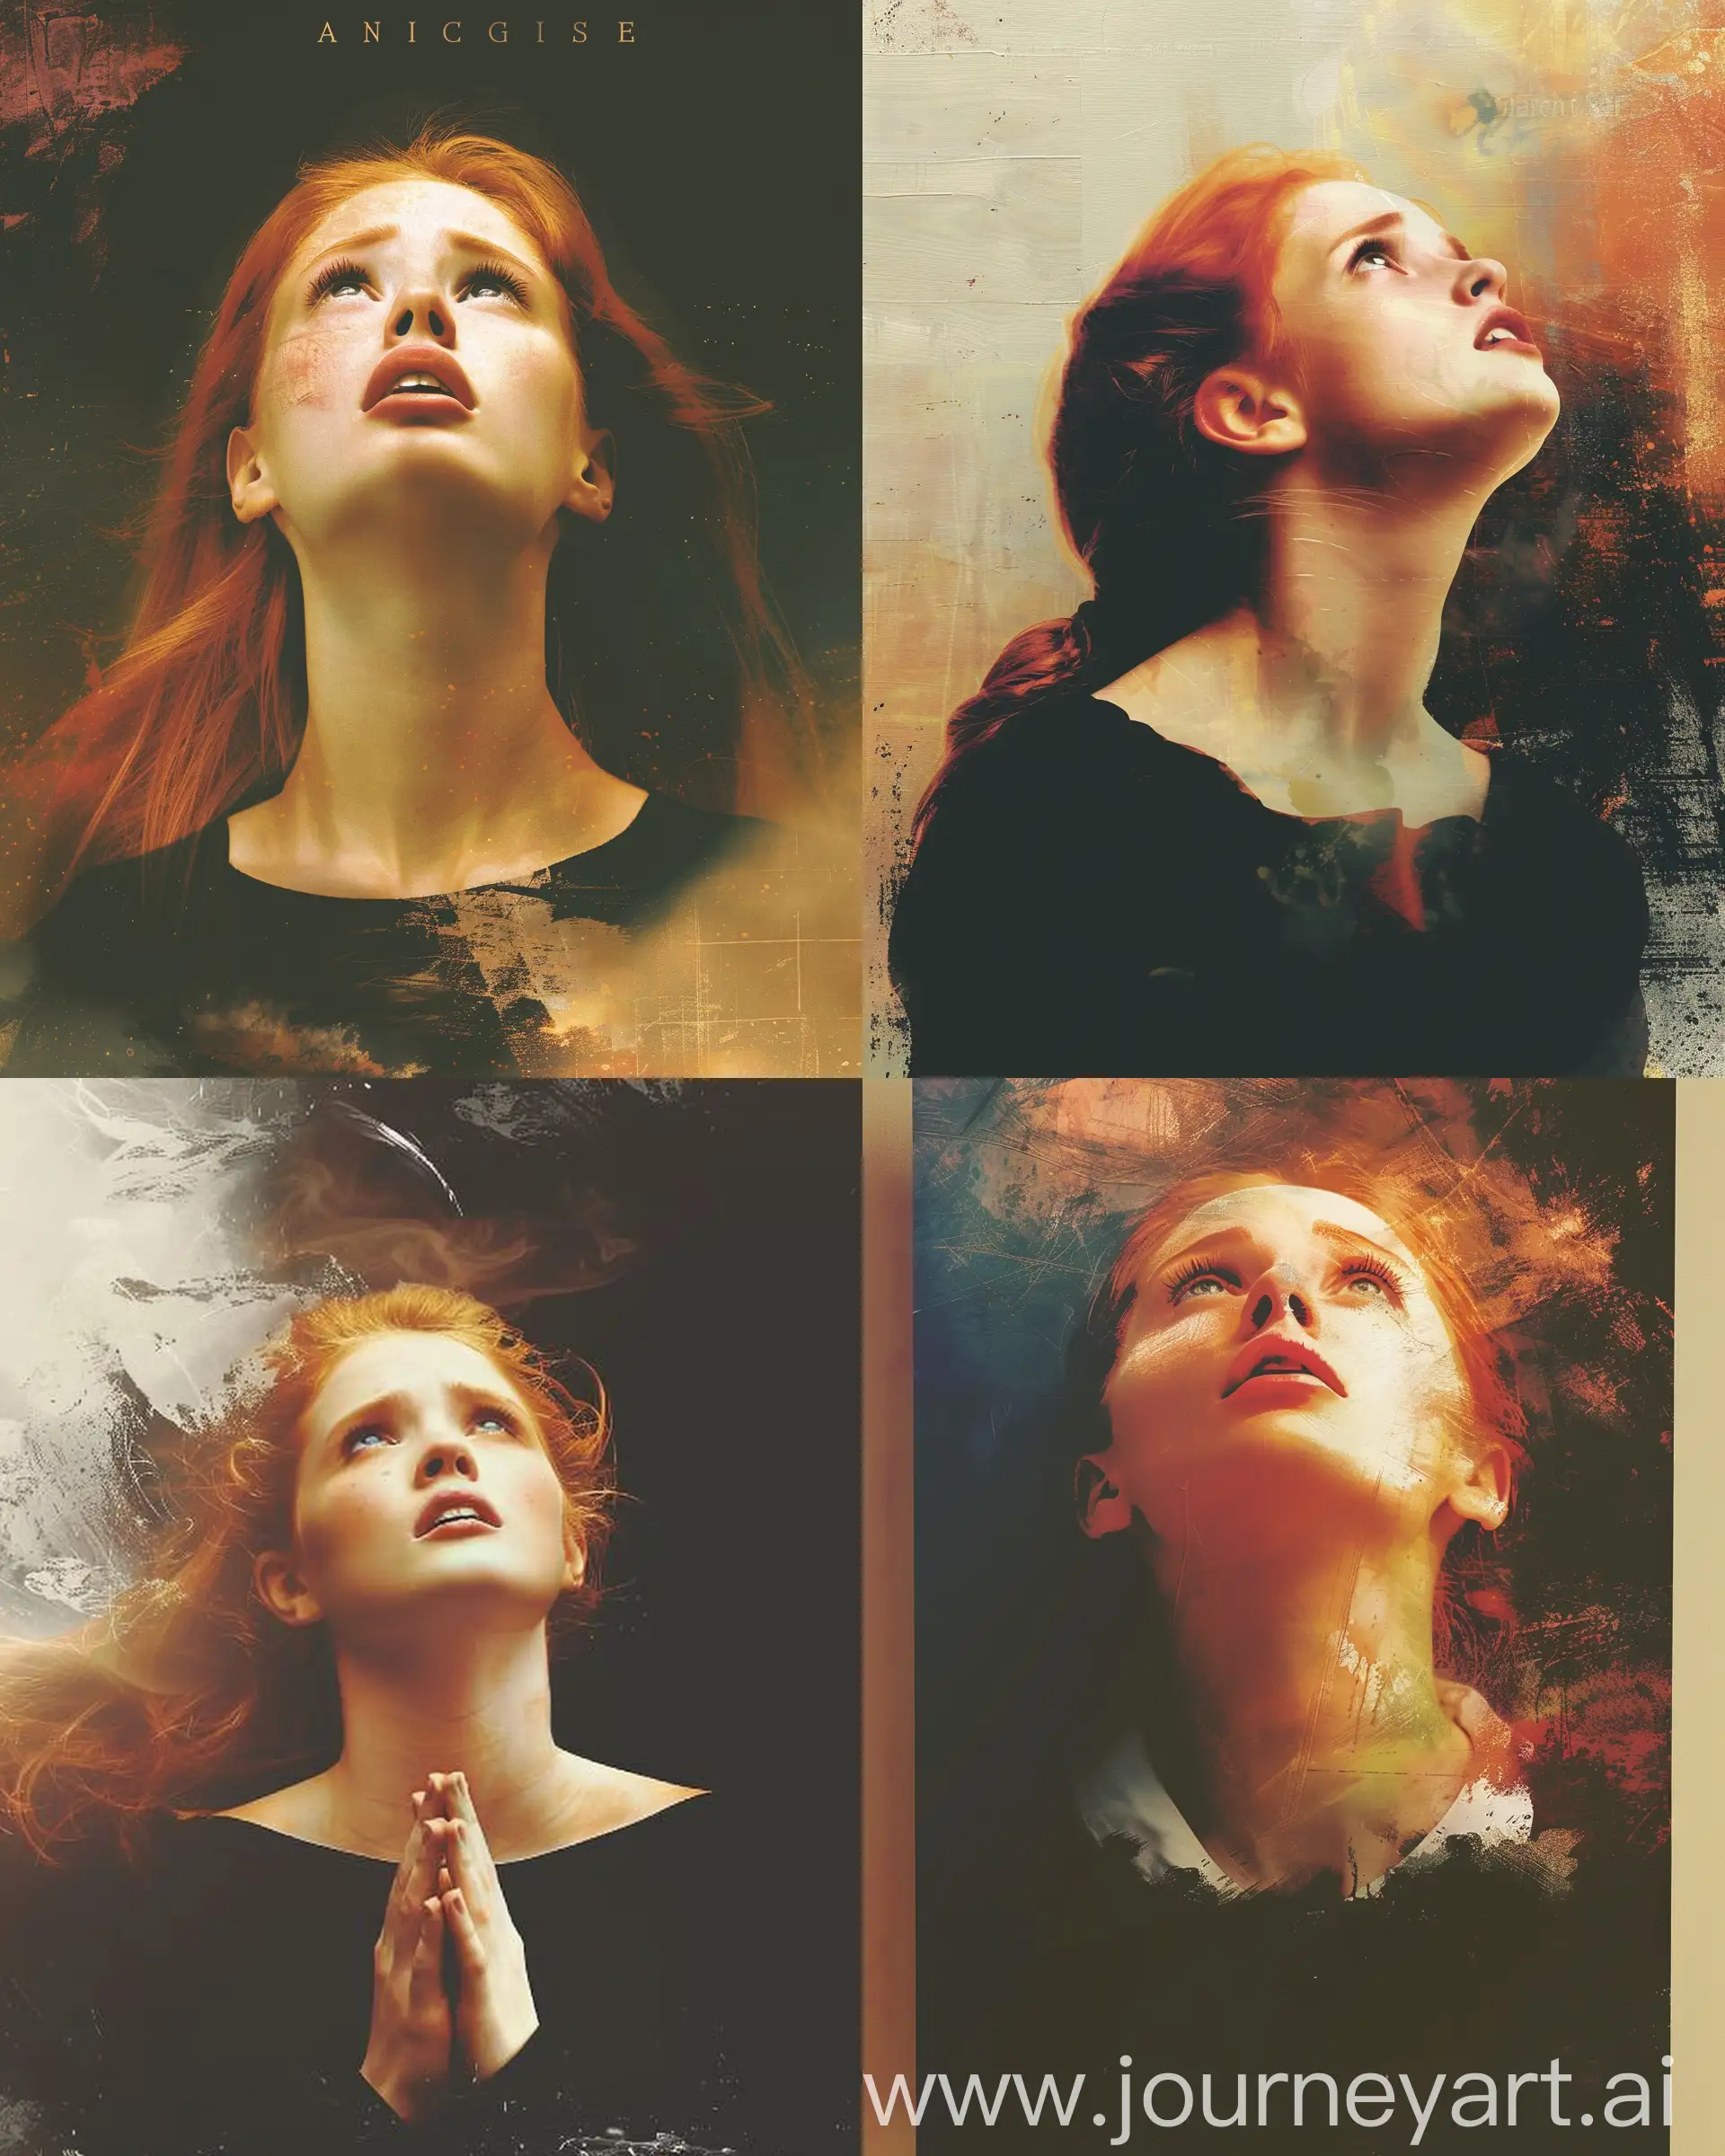 A painting canvas with a beautiful red-haired maiden with lovely features, looking up in lamentation --sref https://i.pinimg.com/564x/a4/a7/7d/a4a77d70ac0fc1e9c75324543f7e9aa7.jpg --v 6 --ar 16:20